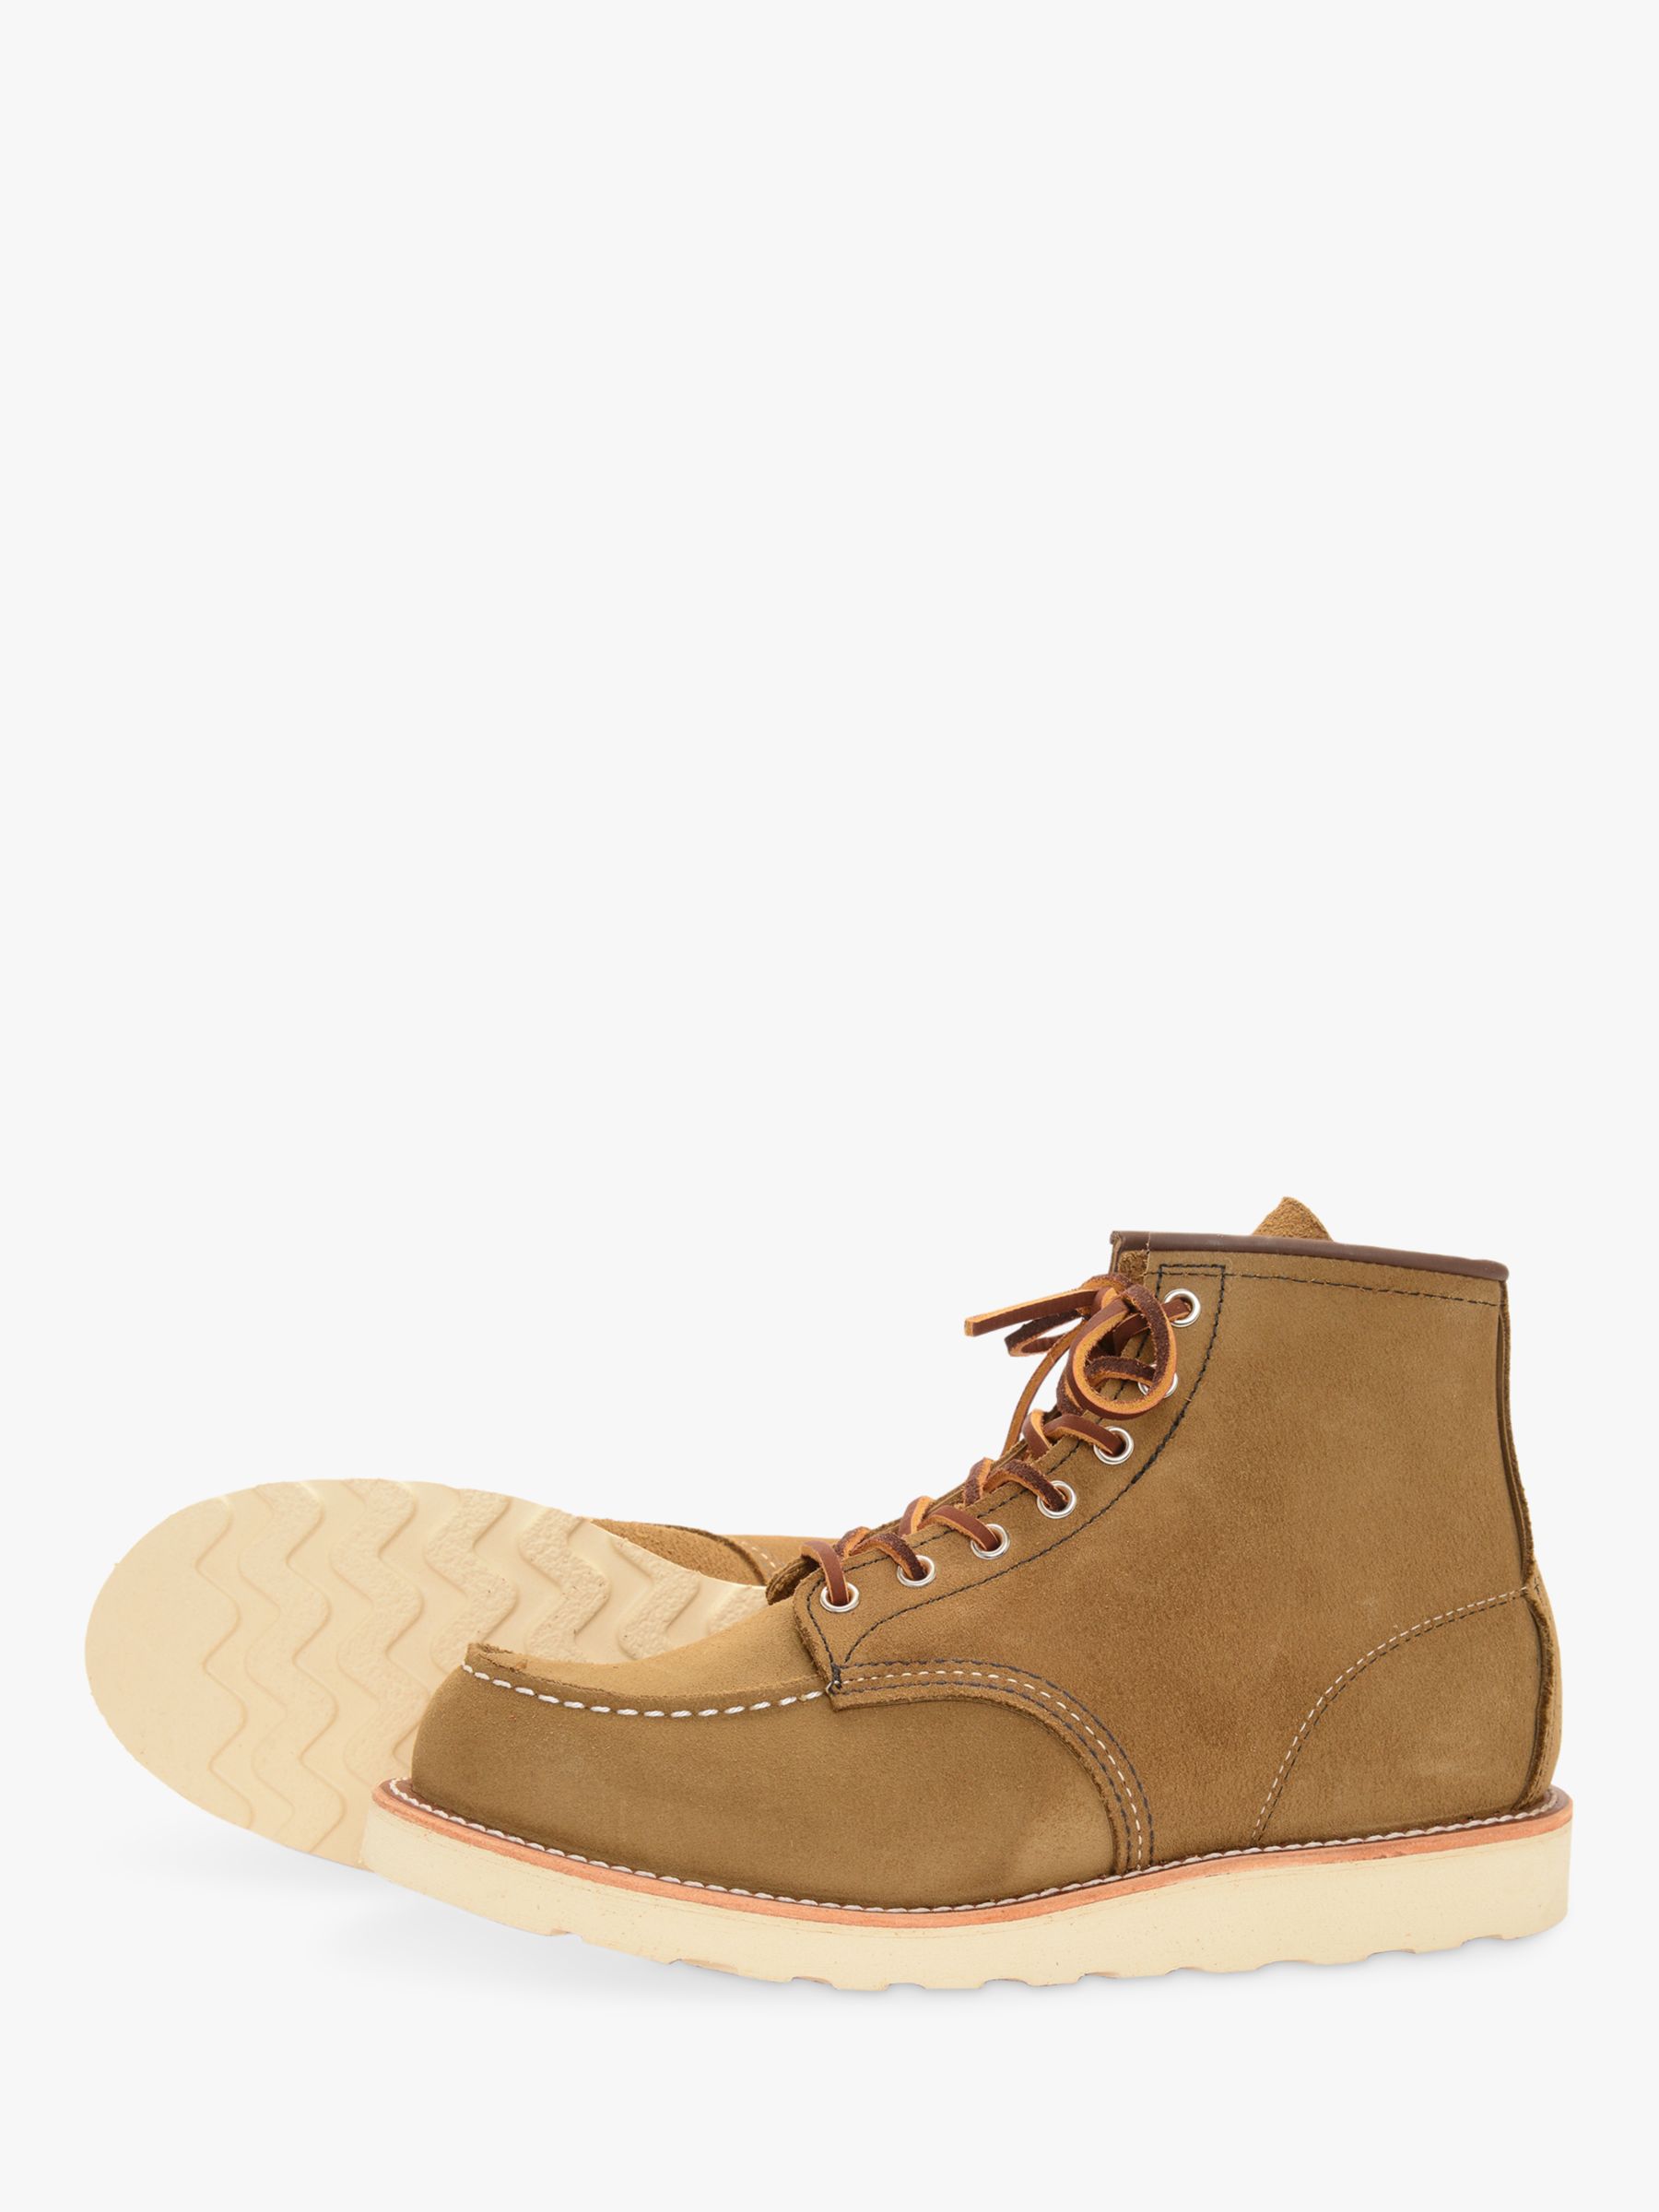 Red Wing Classic Moc Toe Lace-Up Boots, Olive Mohave